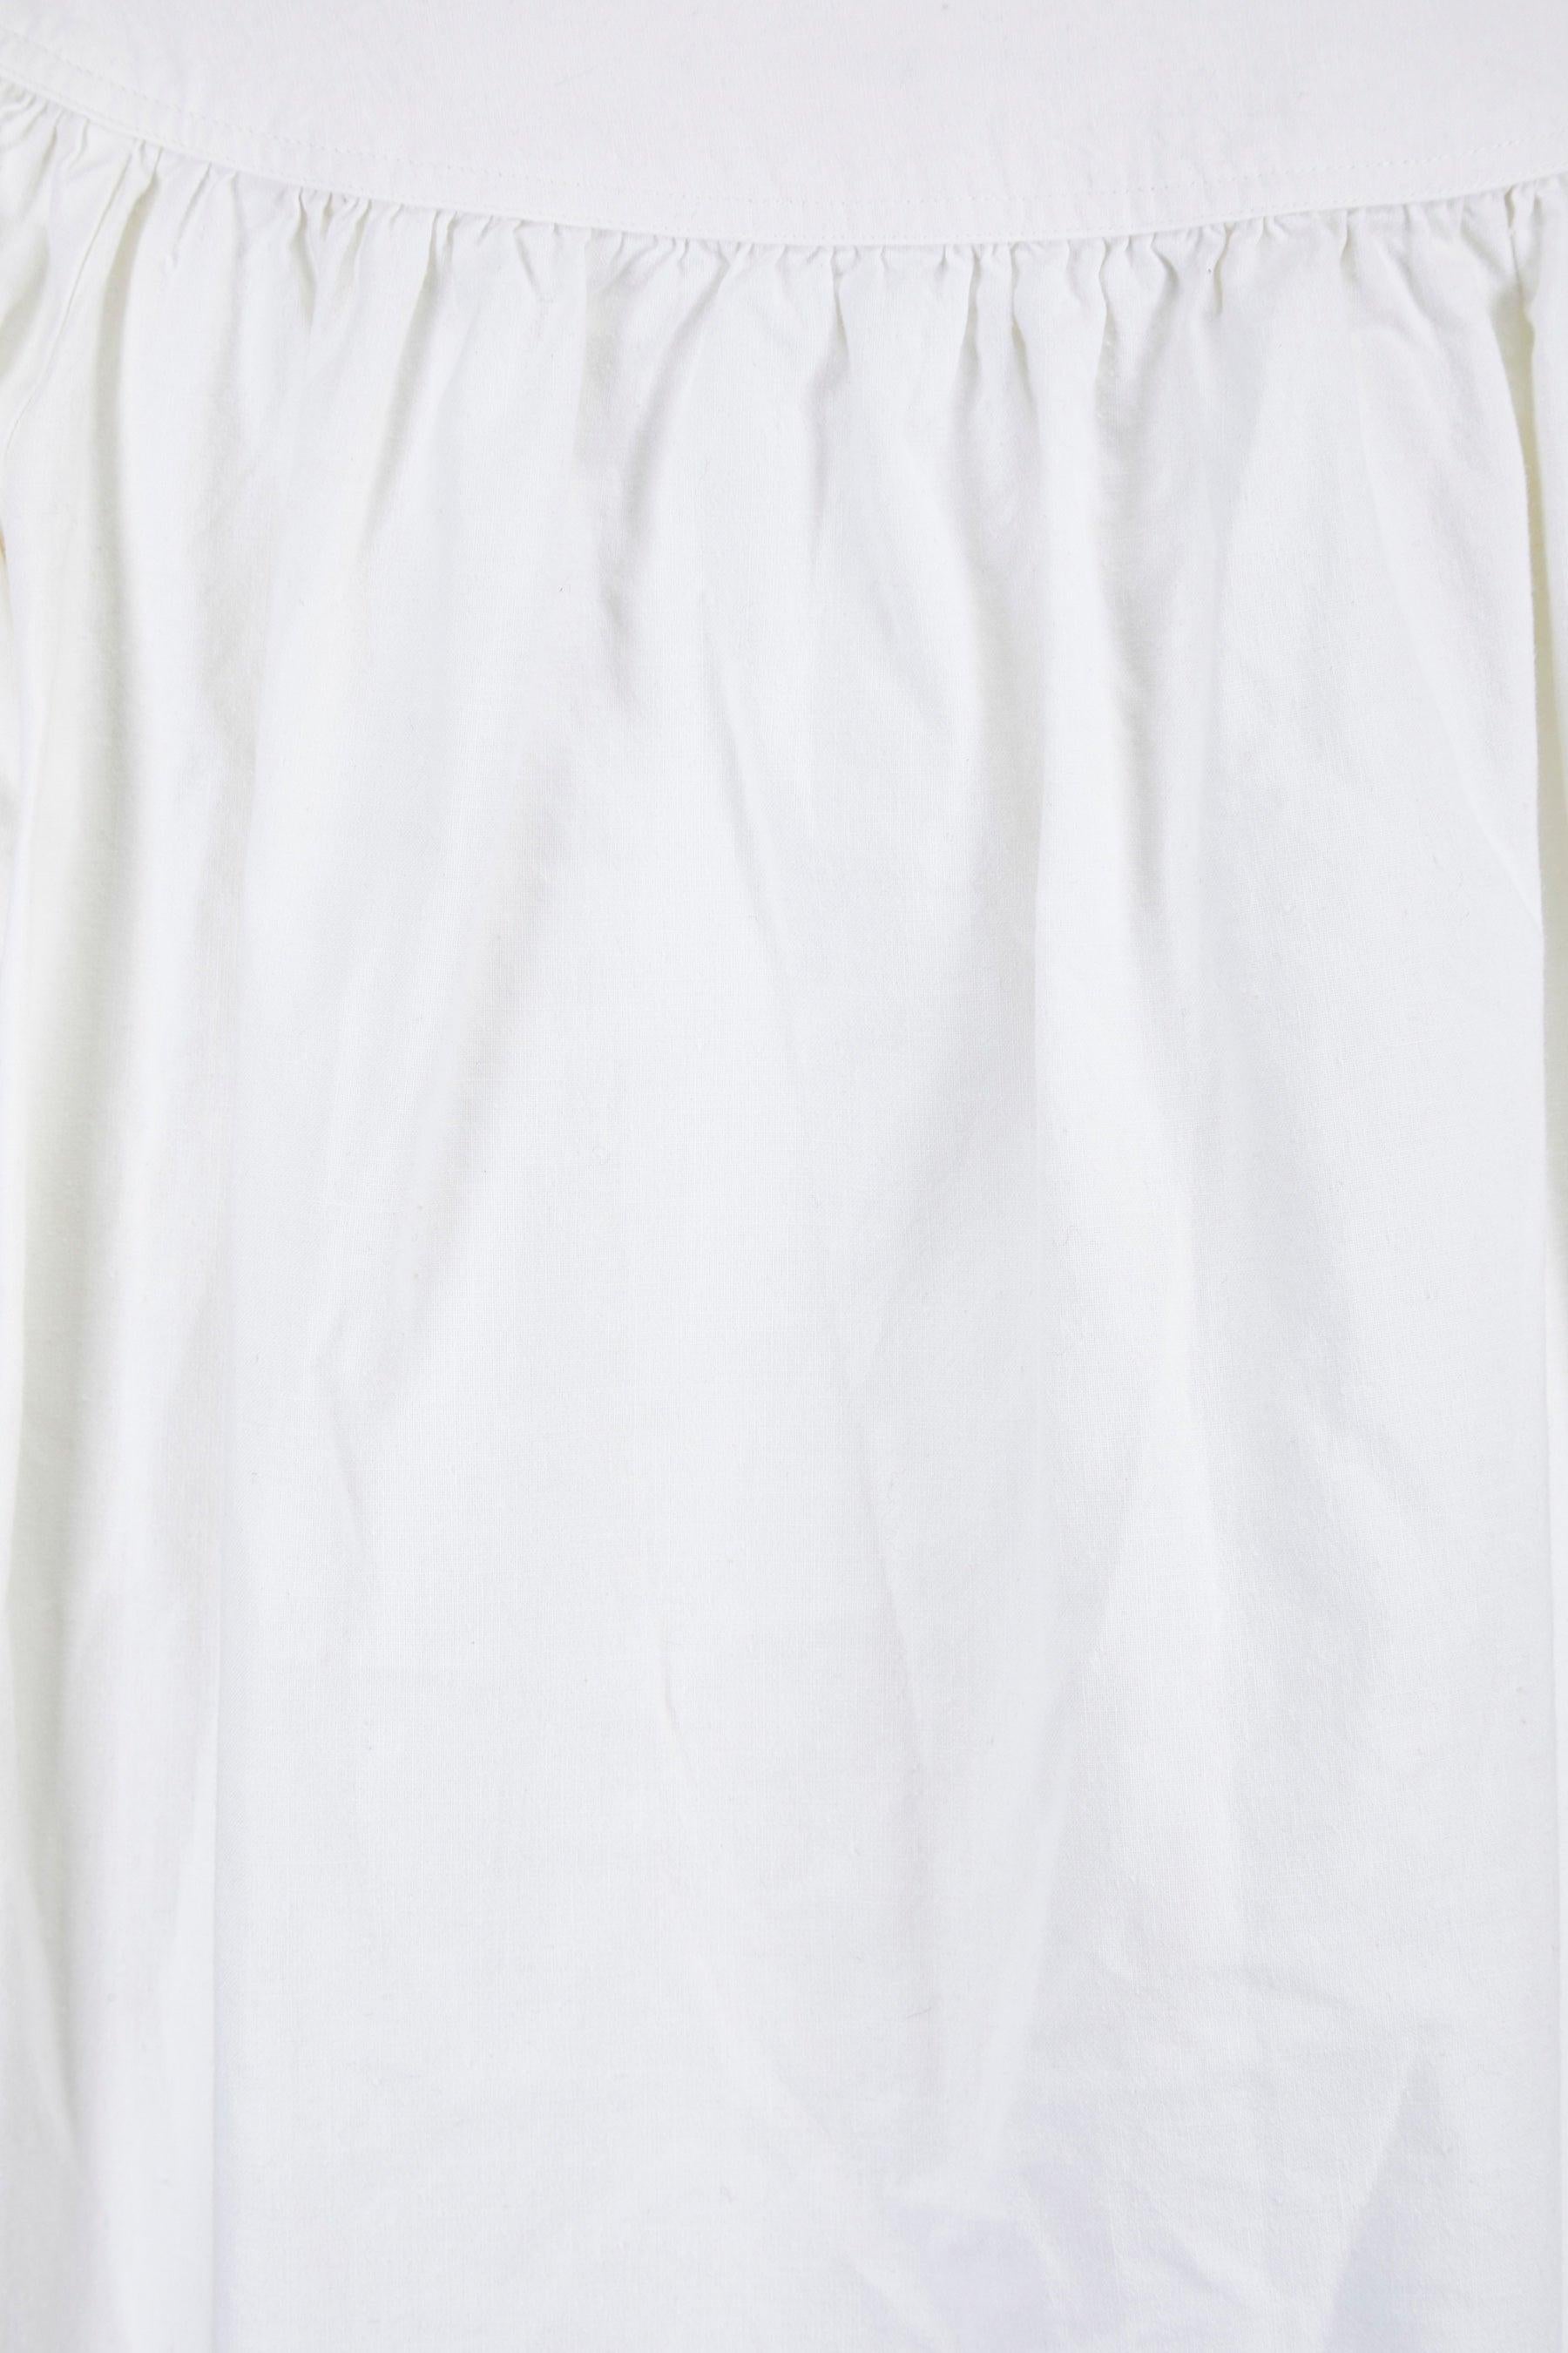 Women's 1975 Yves Saint Laurent Runway White Cotton Skirt and Top Set For Sale